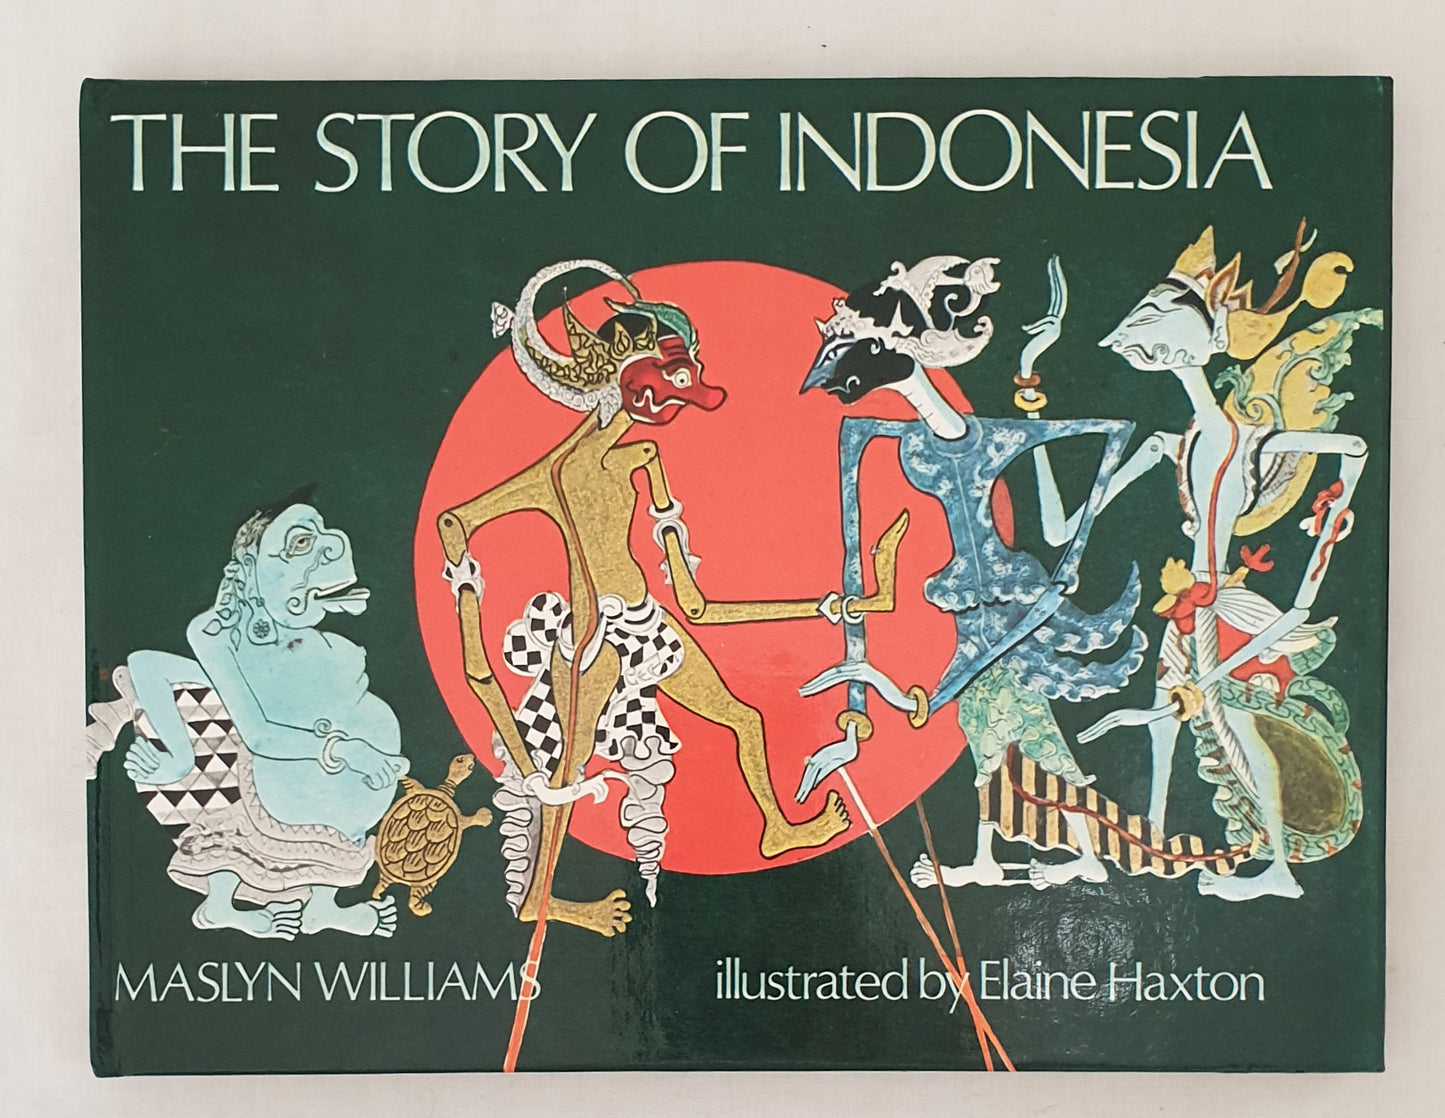 The Story of Indonesia  by Maslyn Williams  Illustrated by Elaine Haxton